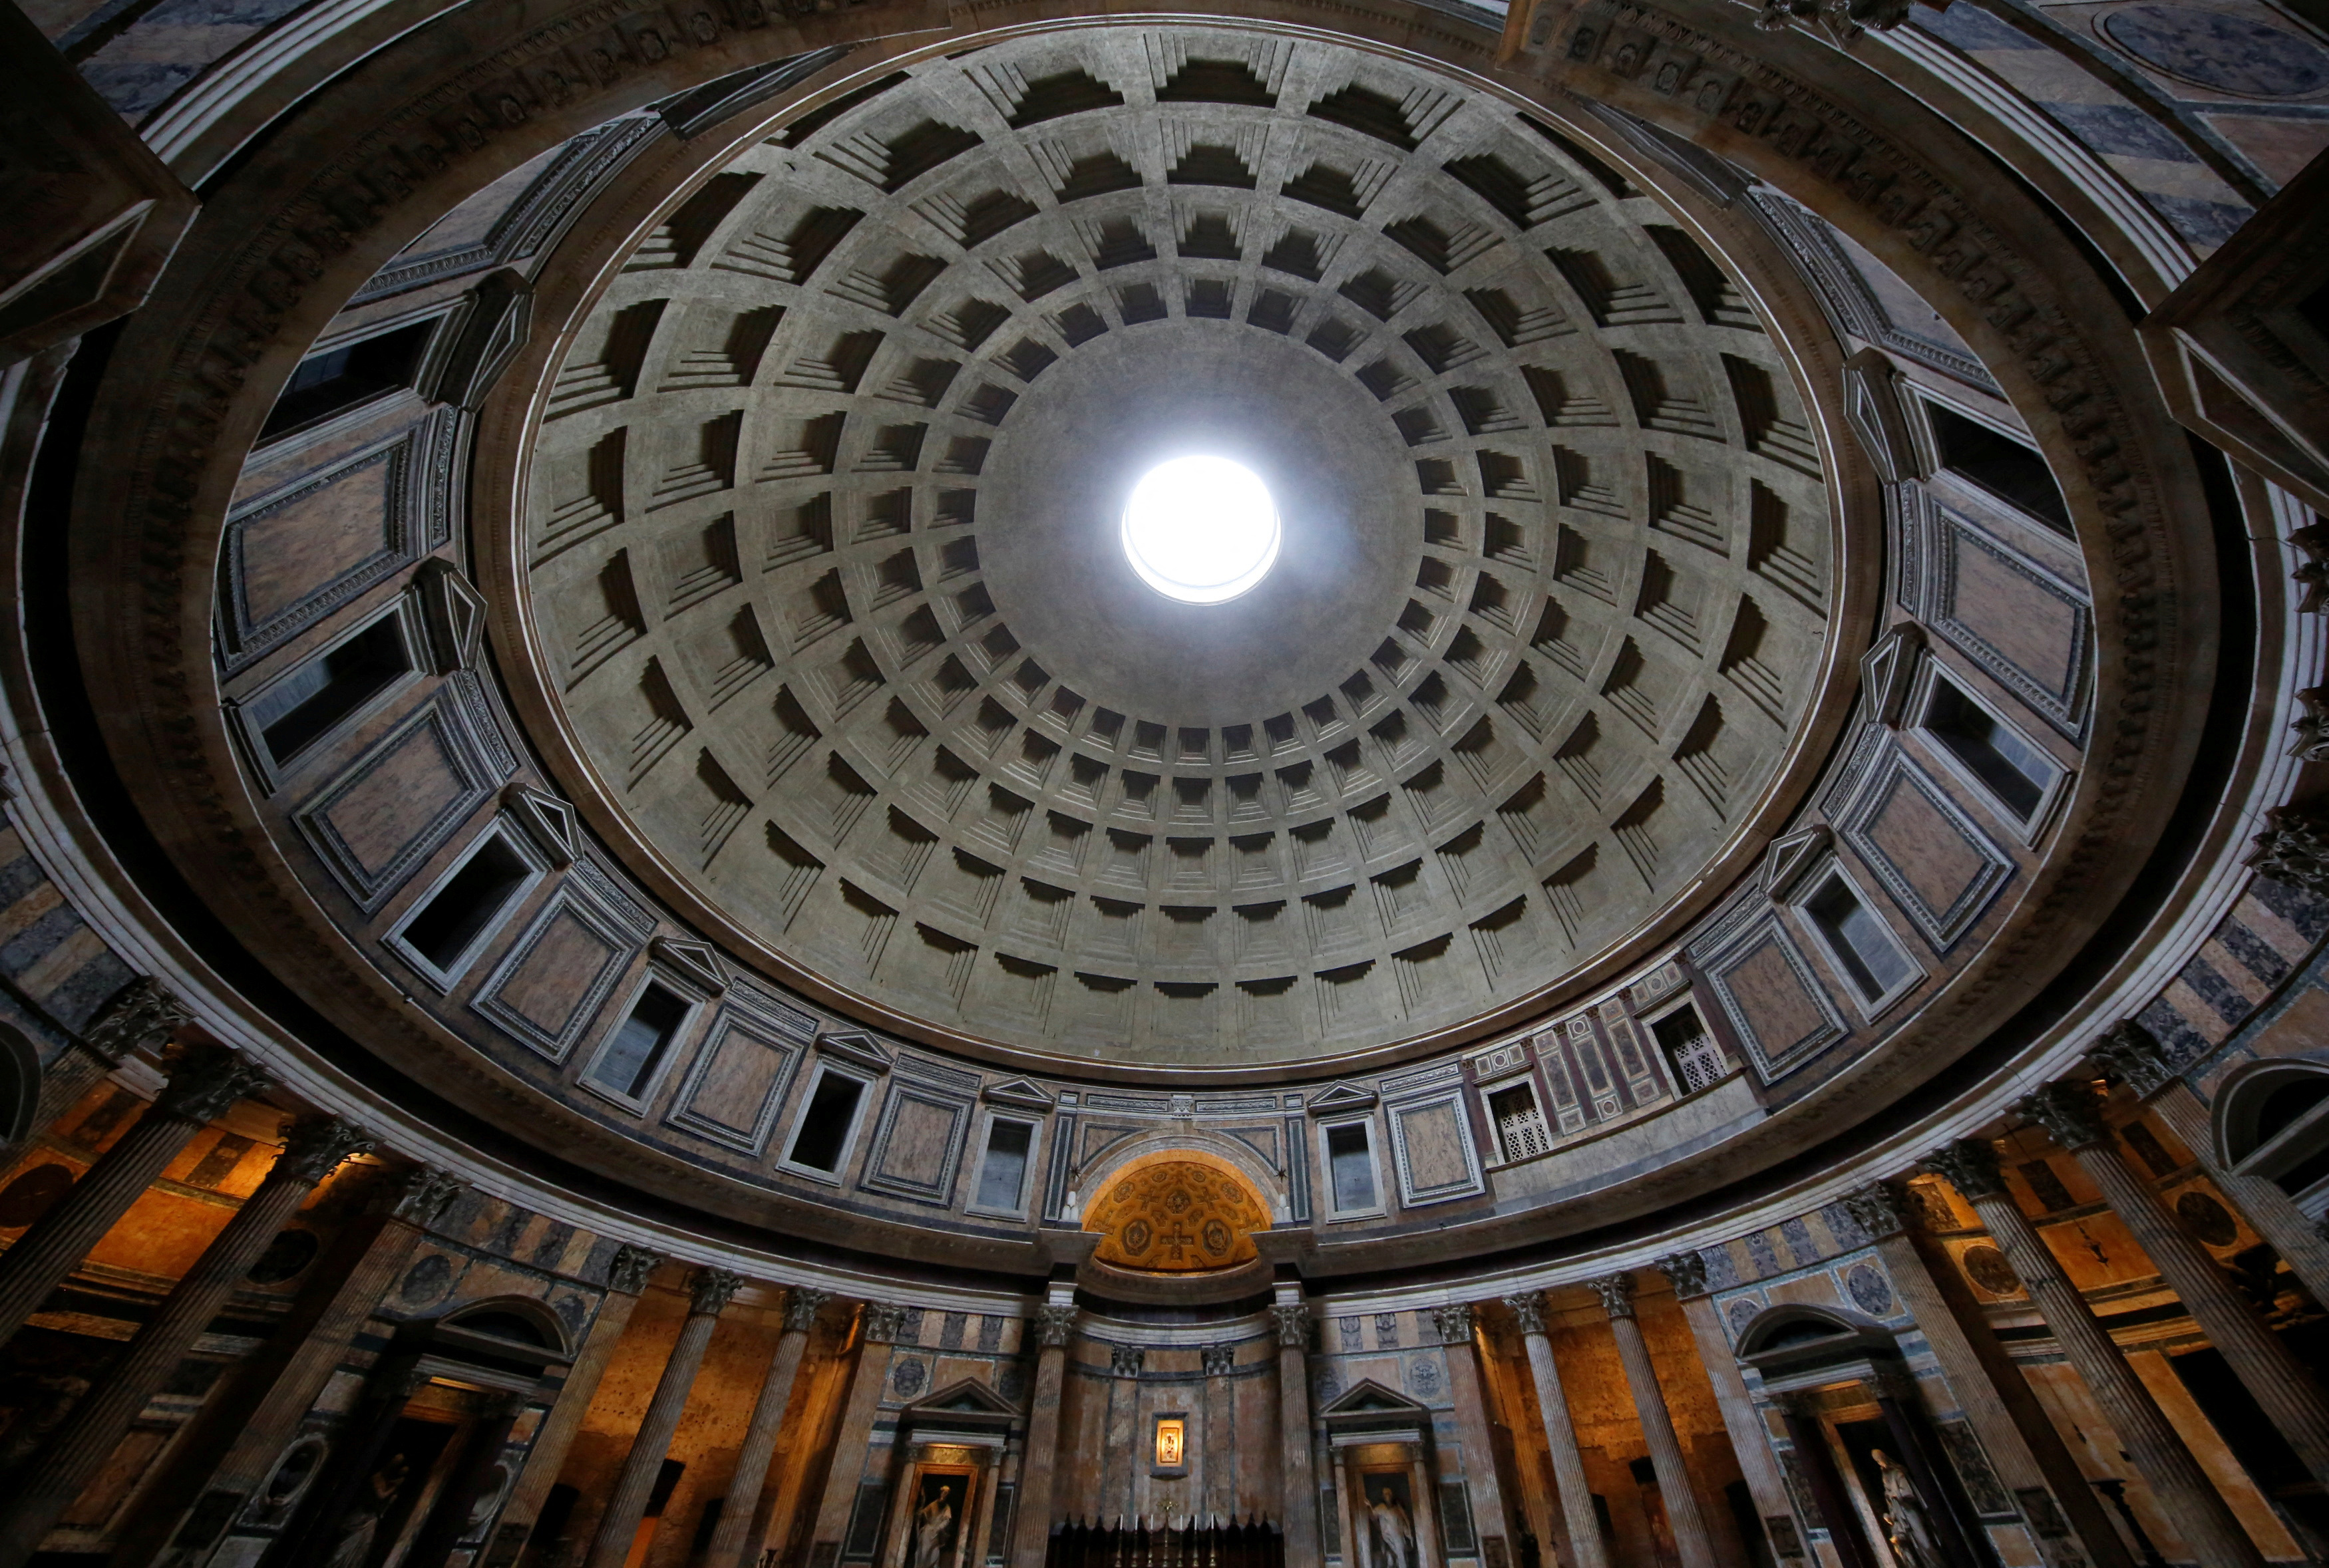 An interior view of the ancient Pantheon in downtown Rome